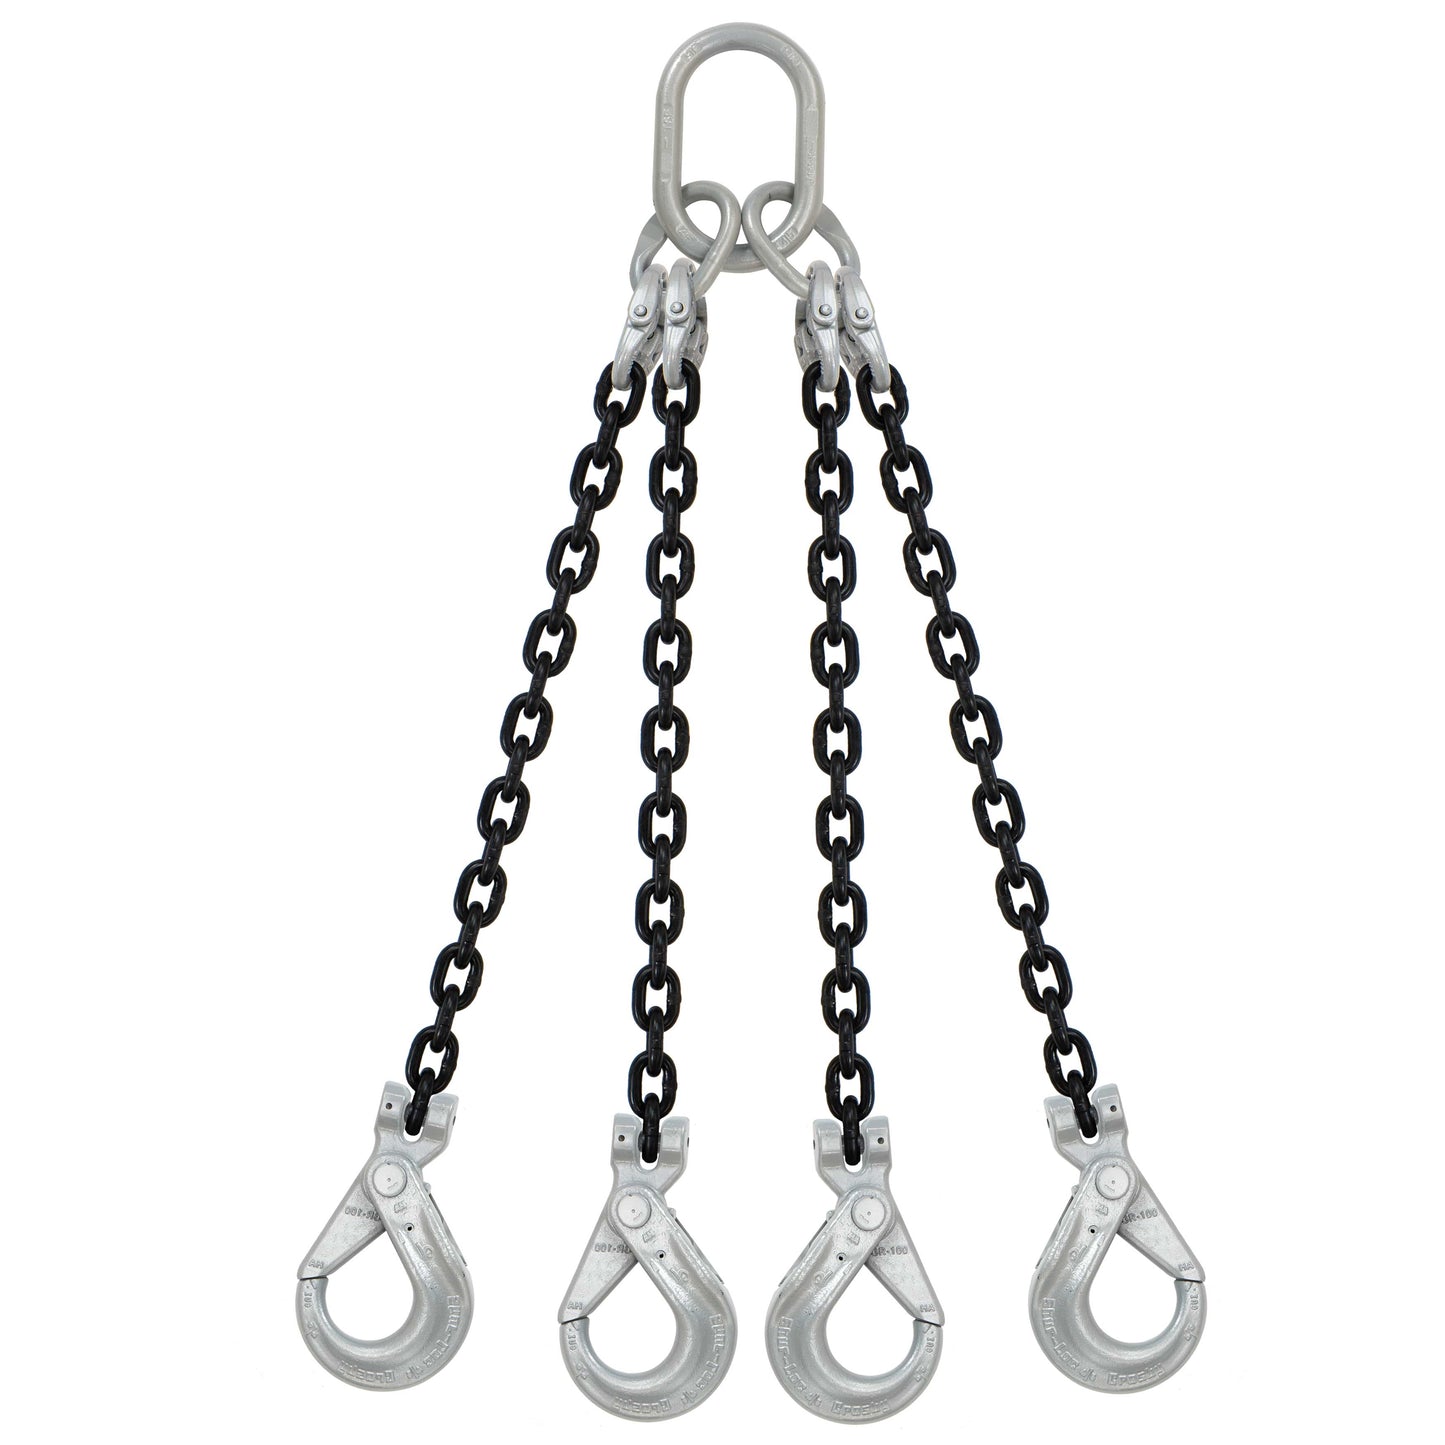 Crosby 1/4 S-1311N Grade 100 Alloy Chain Shortener Link at Rigging Warehouse 1017869